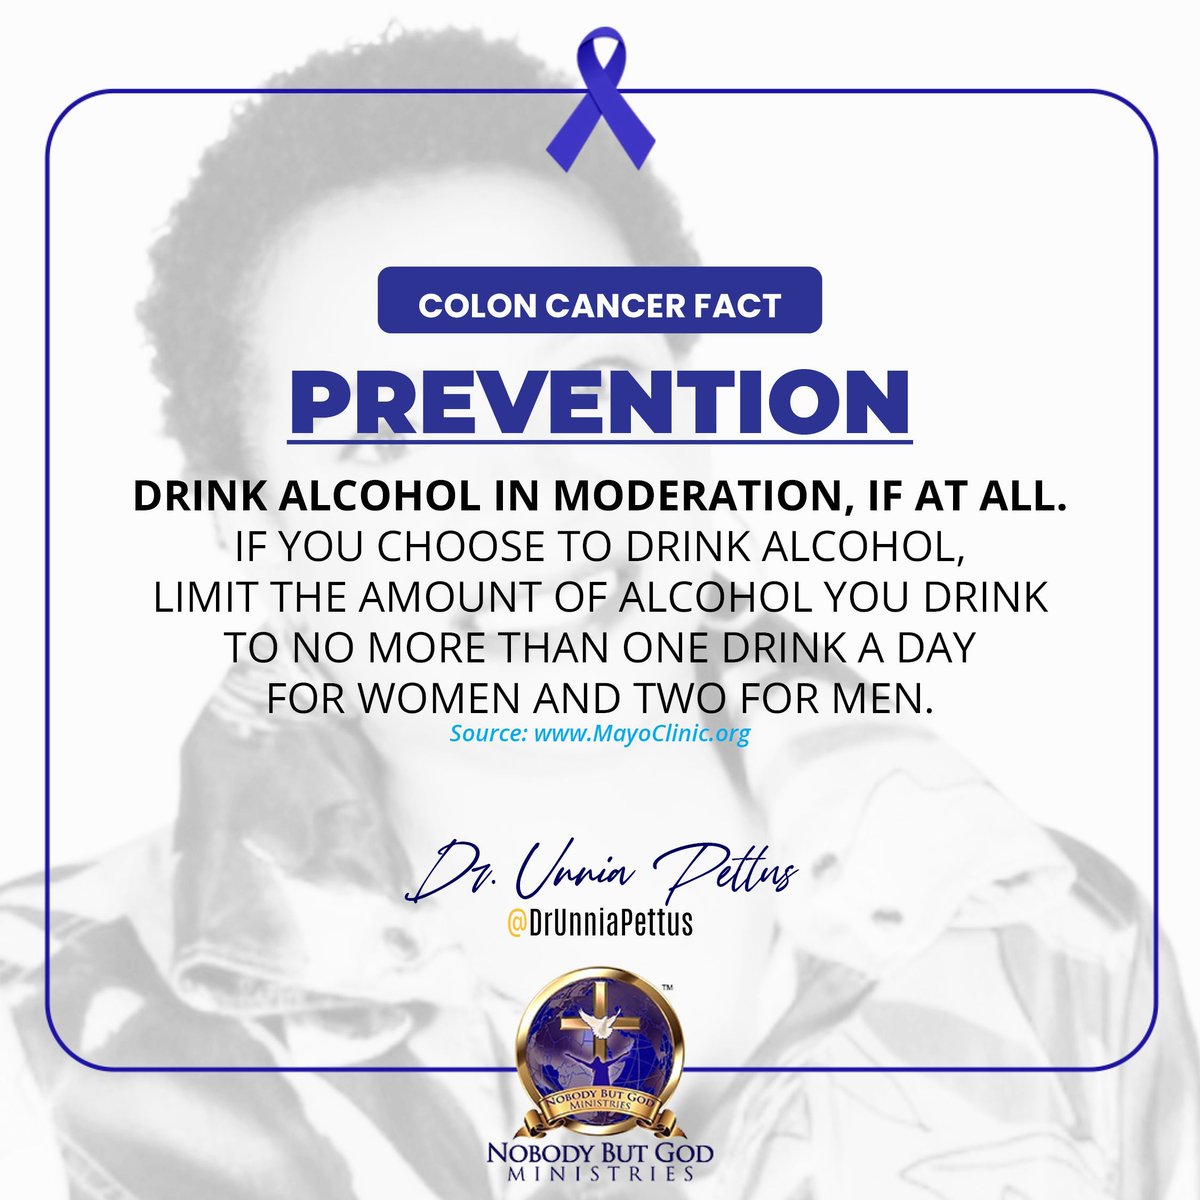 'Protecting Your Gut Health: The Importance of Colon Cancer Prevention”. I hope this
message will bless and inform you throughout this day. @DrUnniaPettus
#WednesdayWellness
#WednesdayInspiration
#WednesdayMotivation
#DrUnniaInspires
#ColonCancer
#CRCSM
#NobodyButGodMinistries